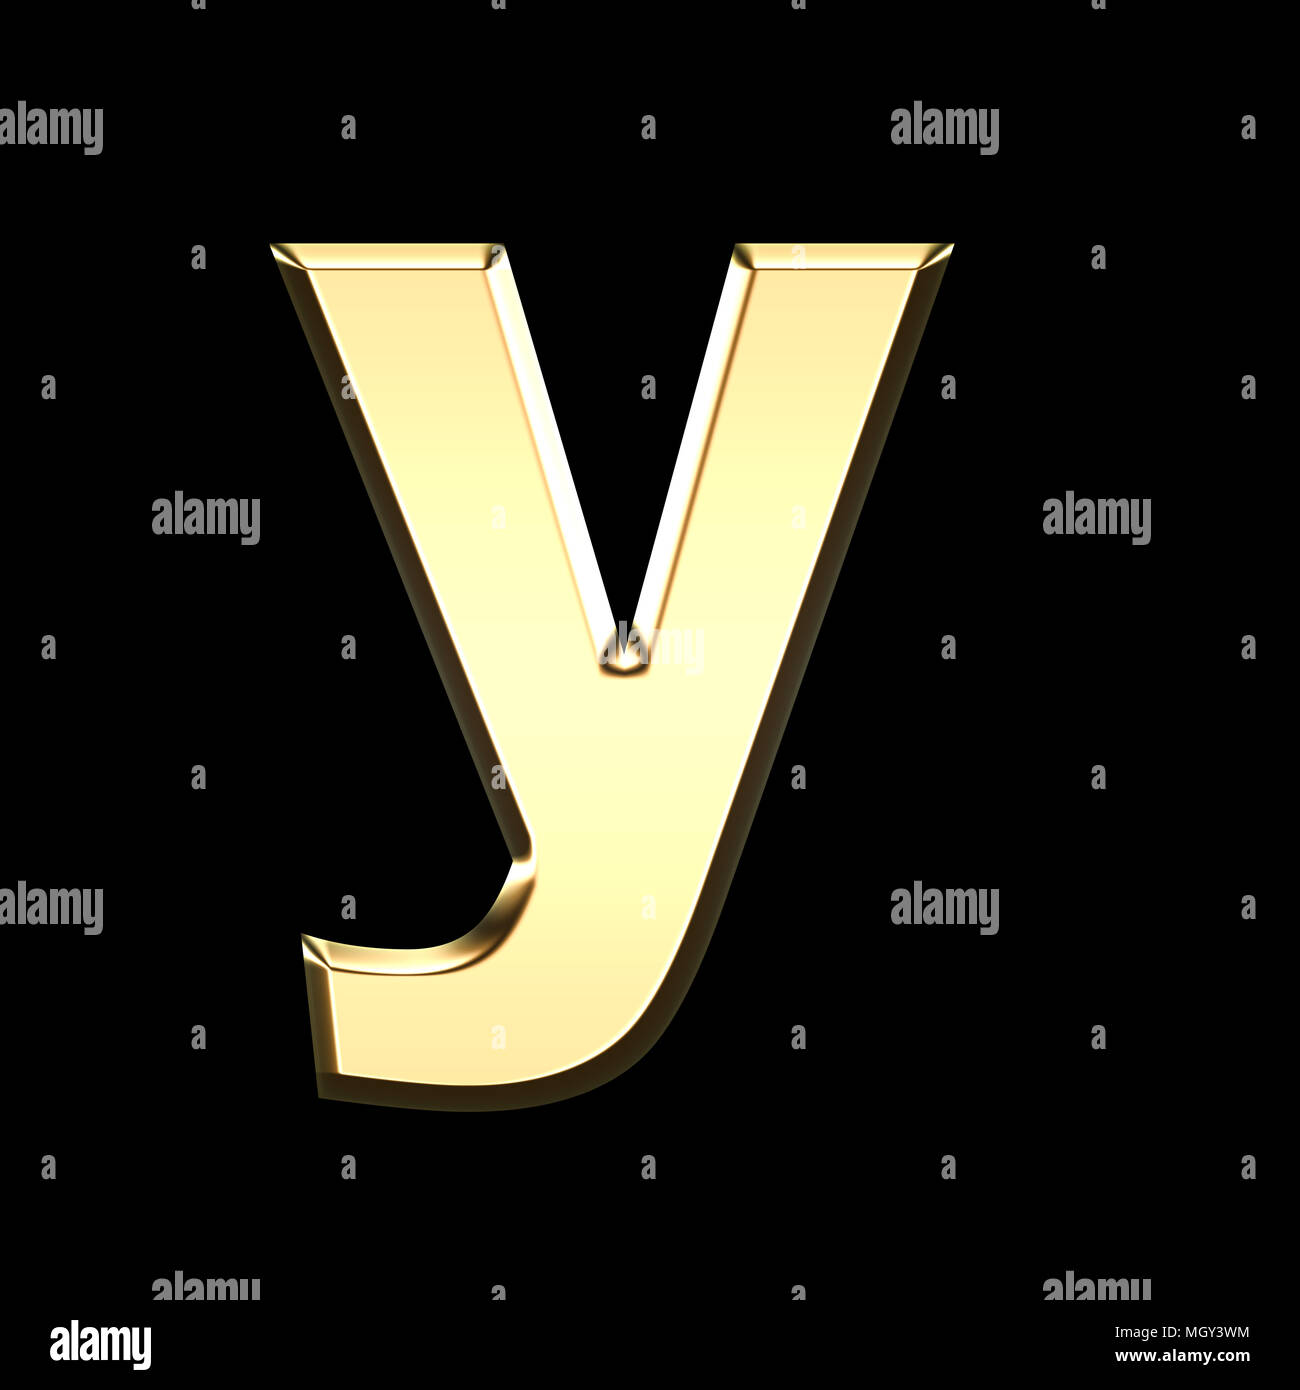 golden english letter y on black background Stock Photo - Alamy